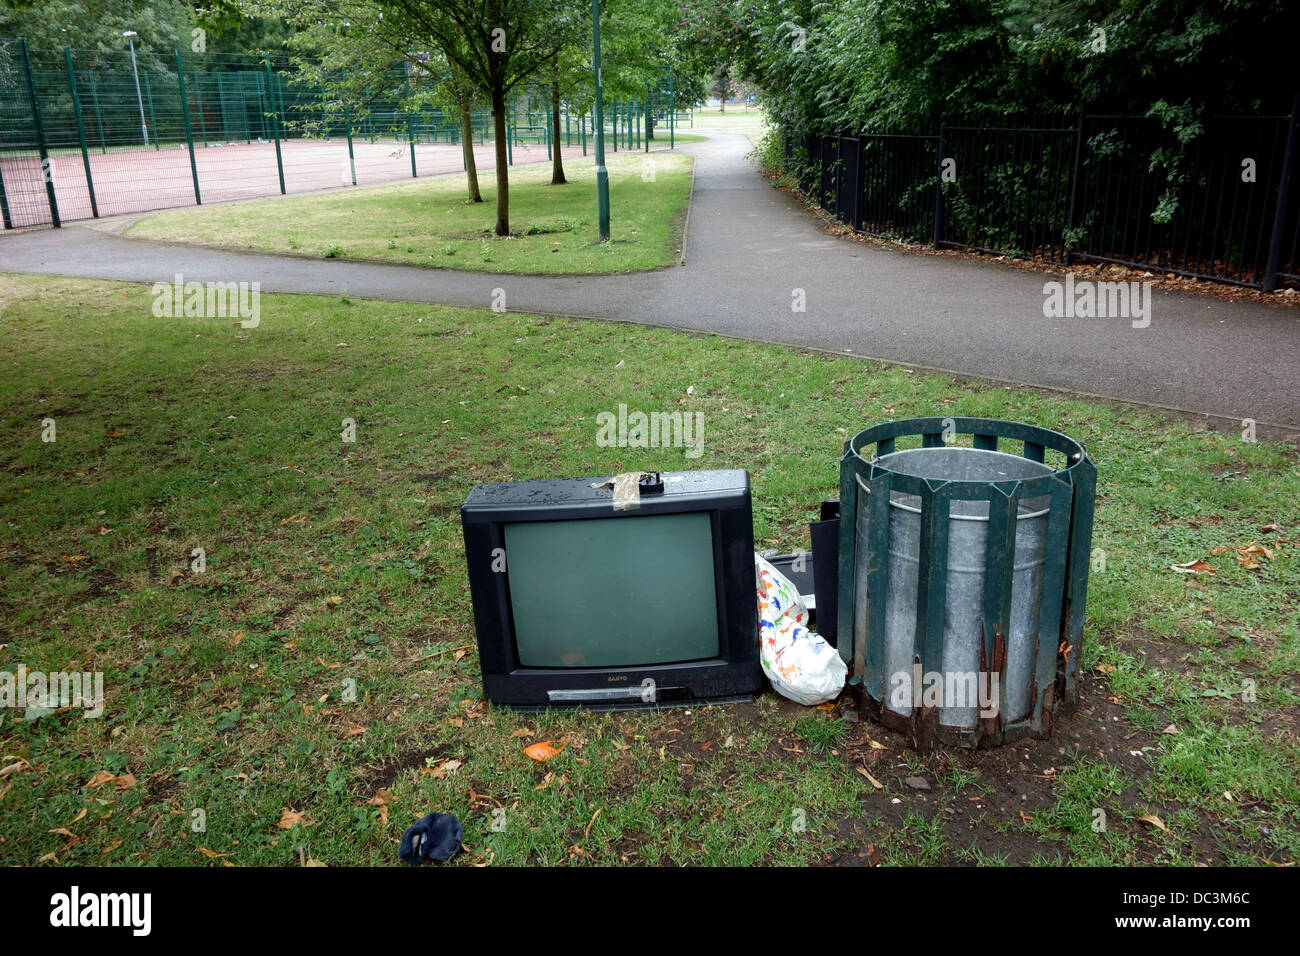 Fly-tipped television set in South London park Stock Photo